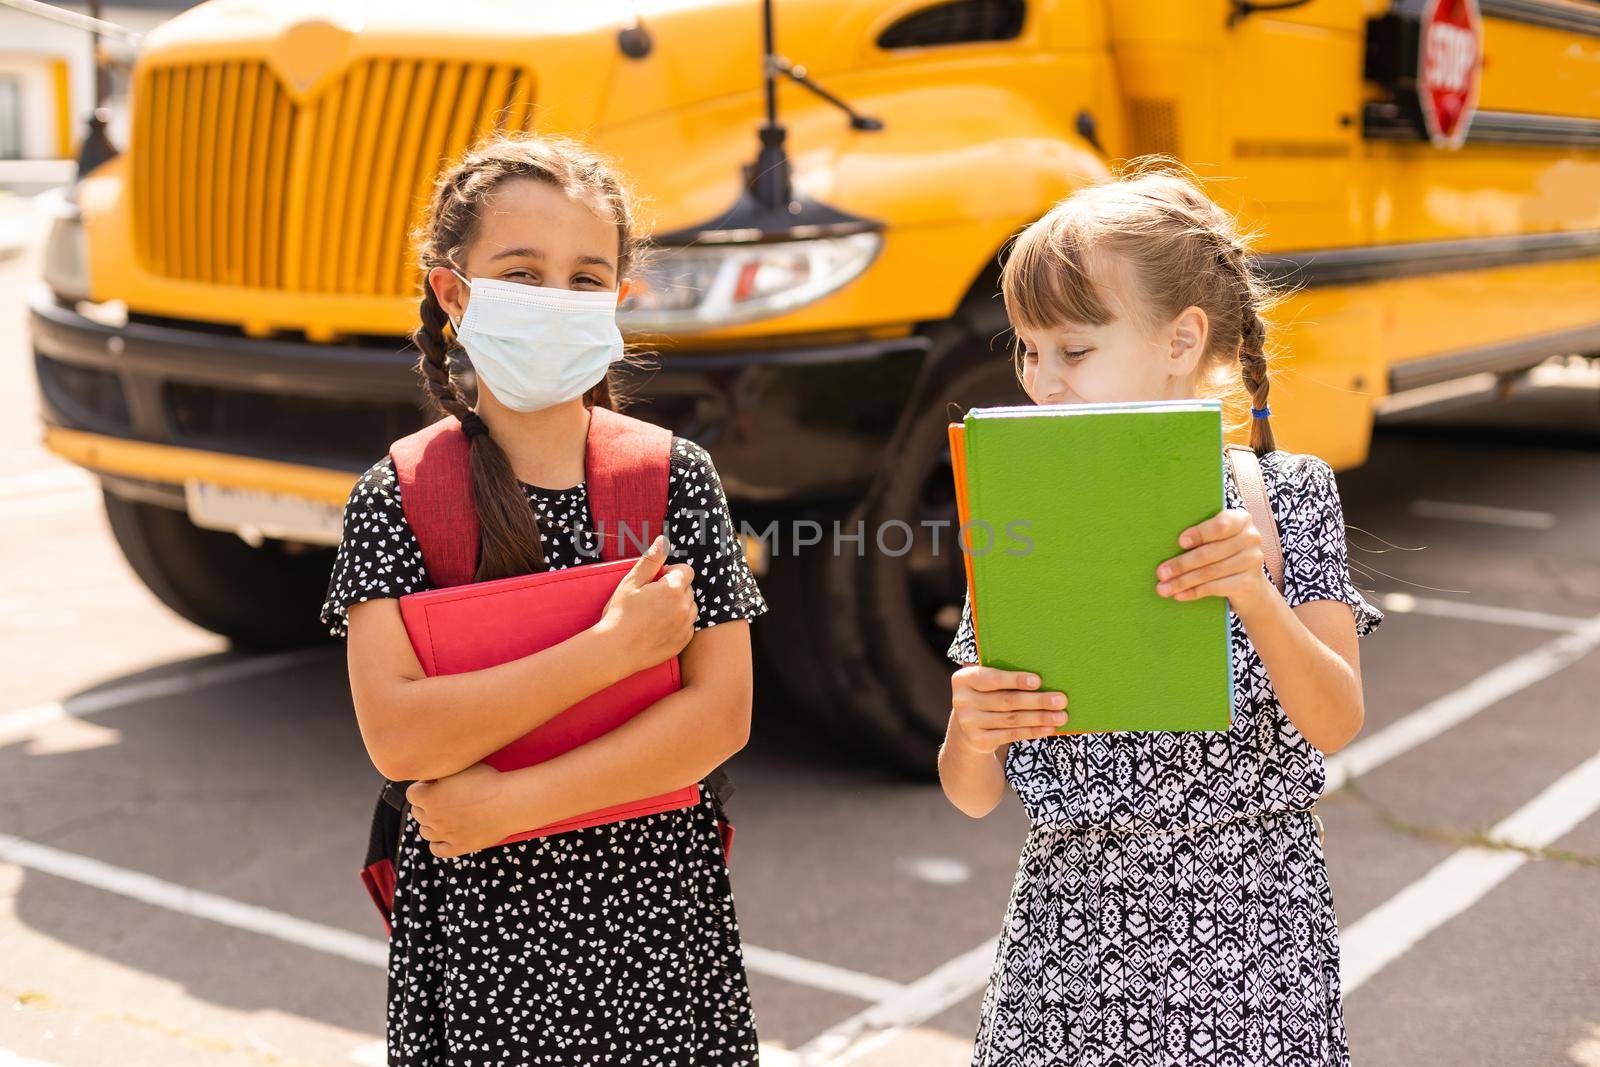 The schoolgirl puts on a mask to prevent colds and viruses. Medical concept. Back to school. Child going school after pandemic over